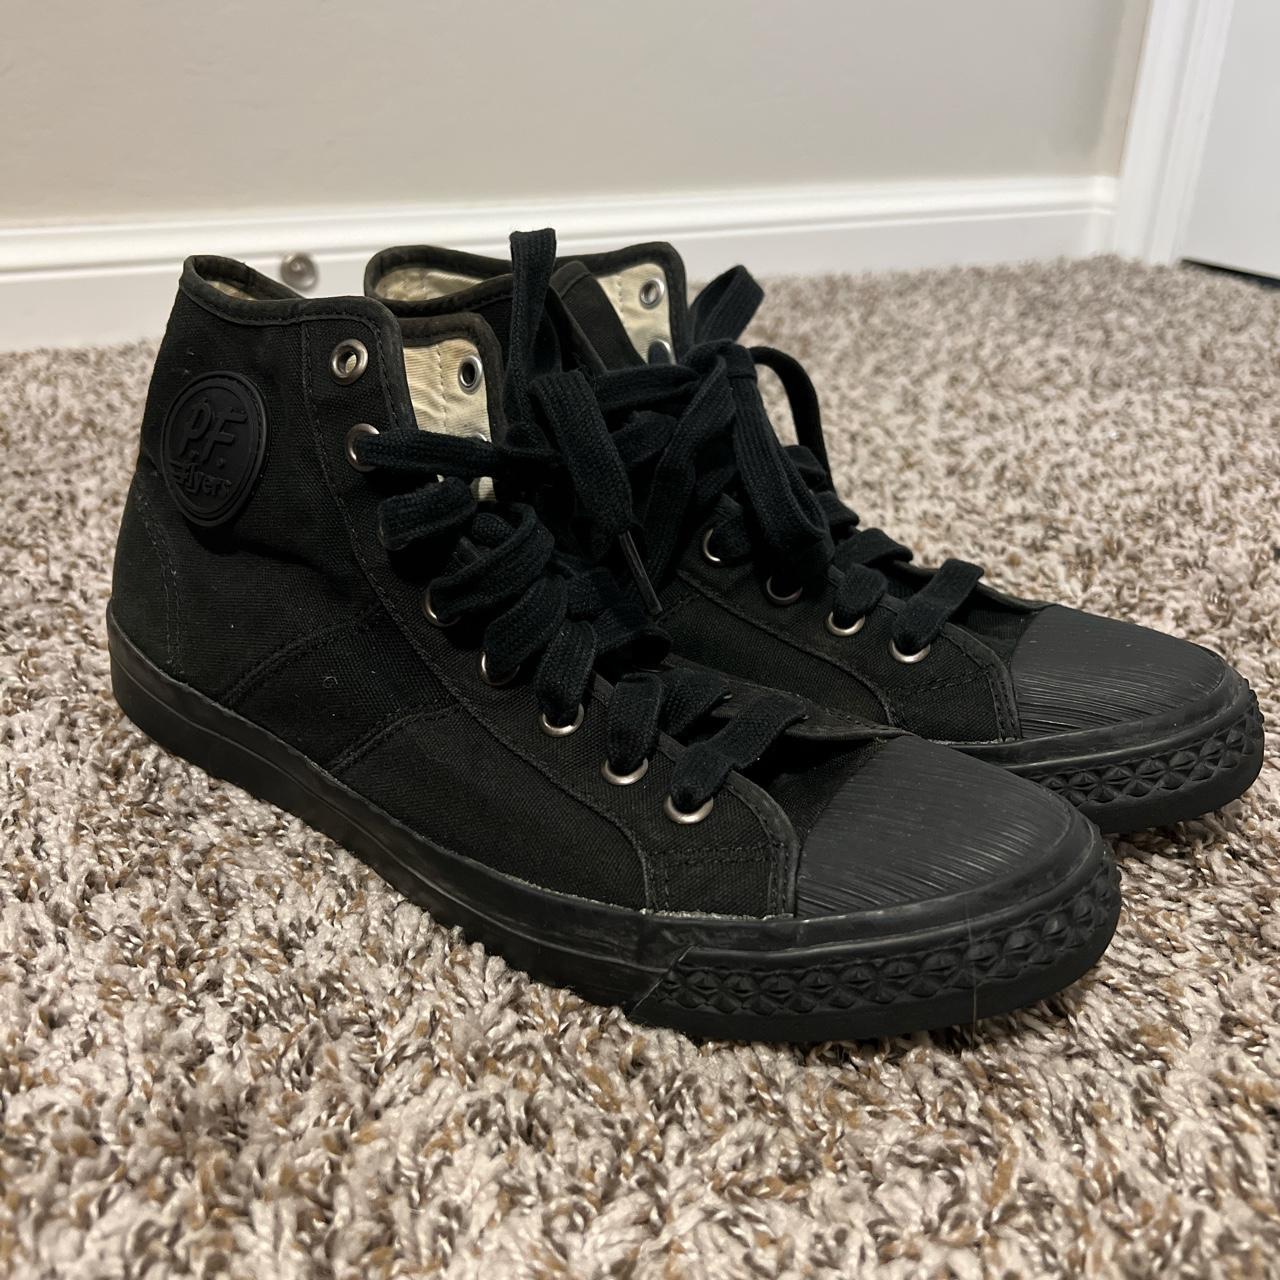 Rare Pf Flyers Ramblers!! very great and unique... - Depop